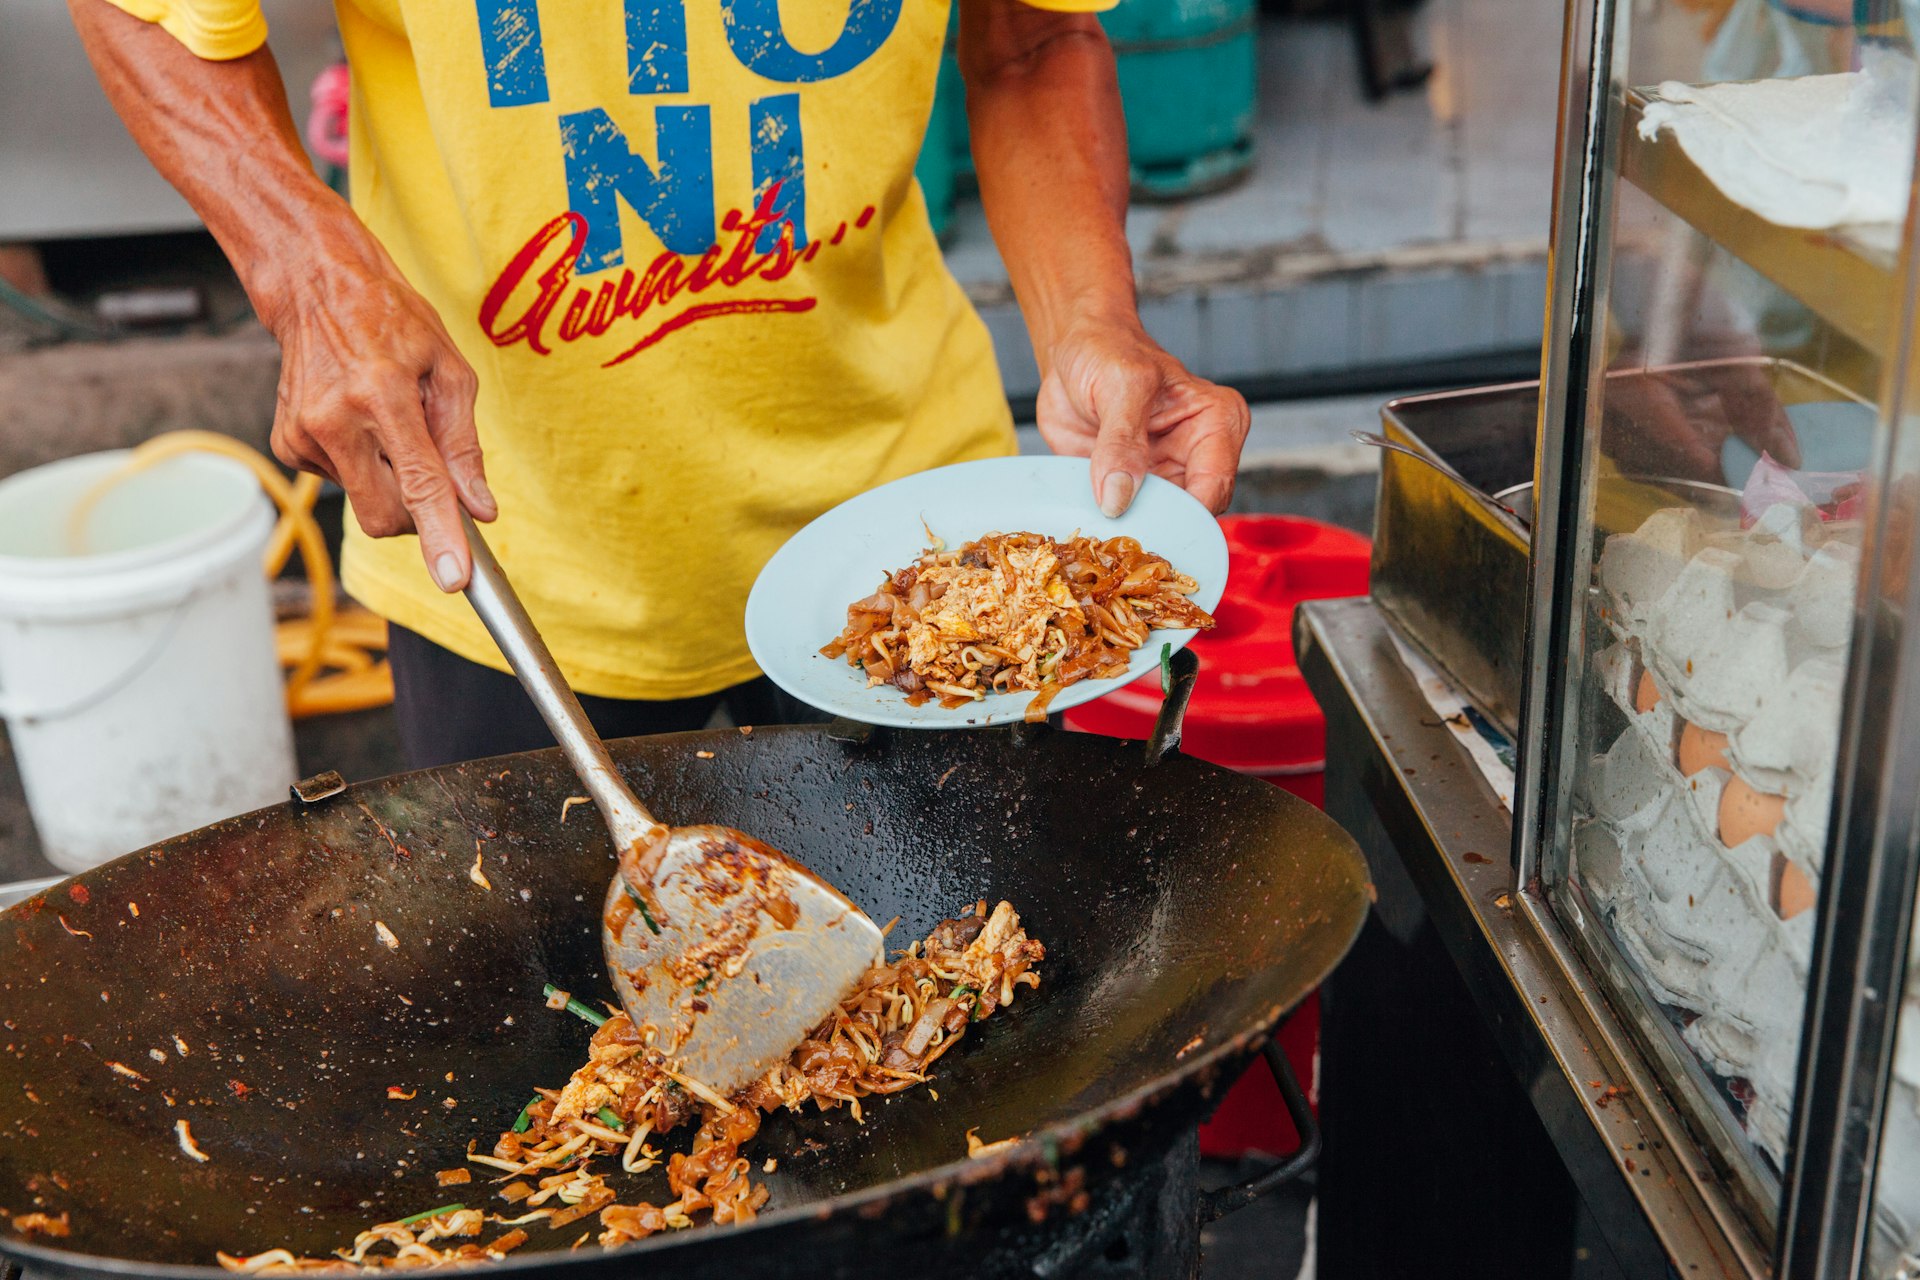 A hawker prepares a noodle dish in a wok at a street food market